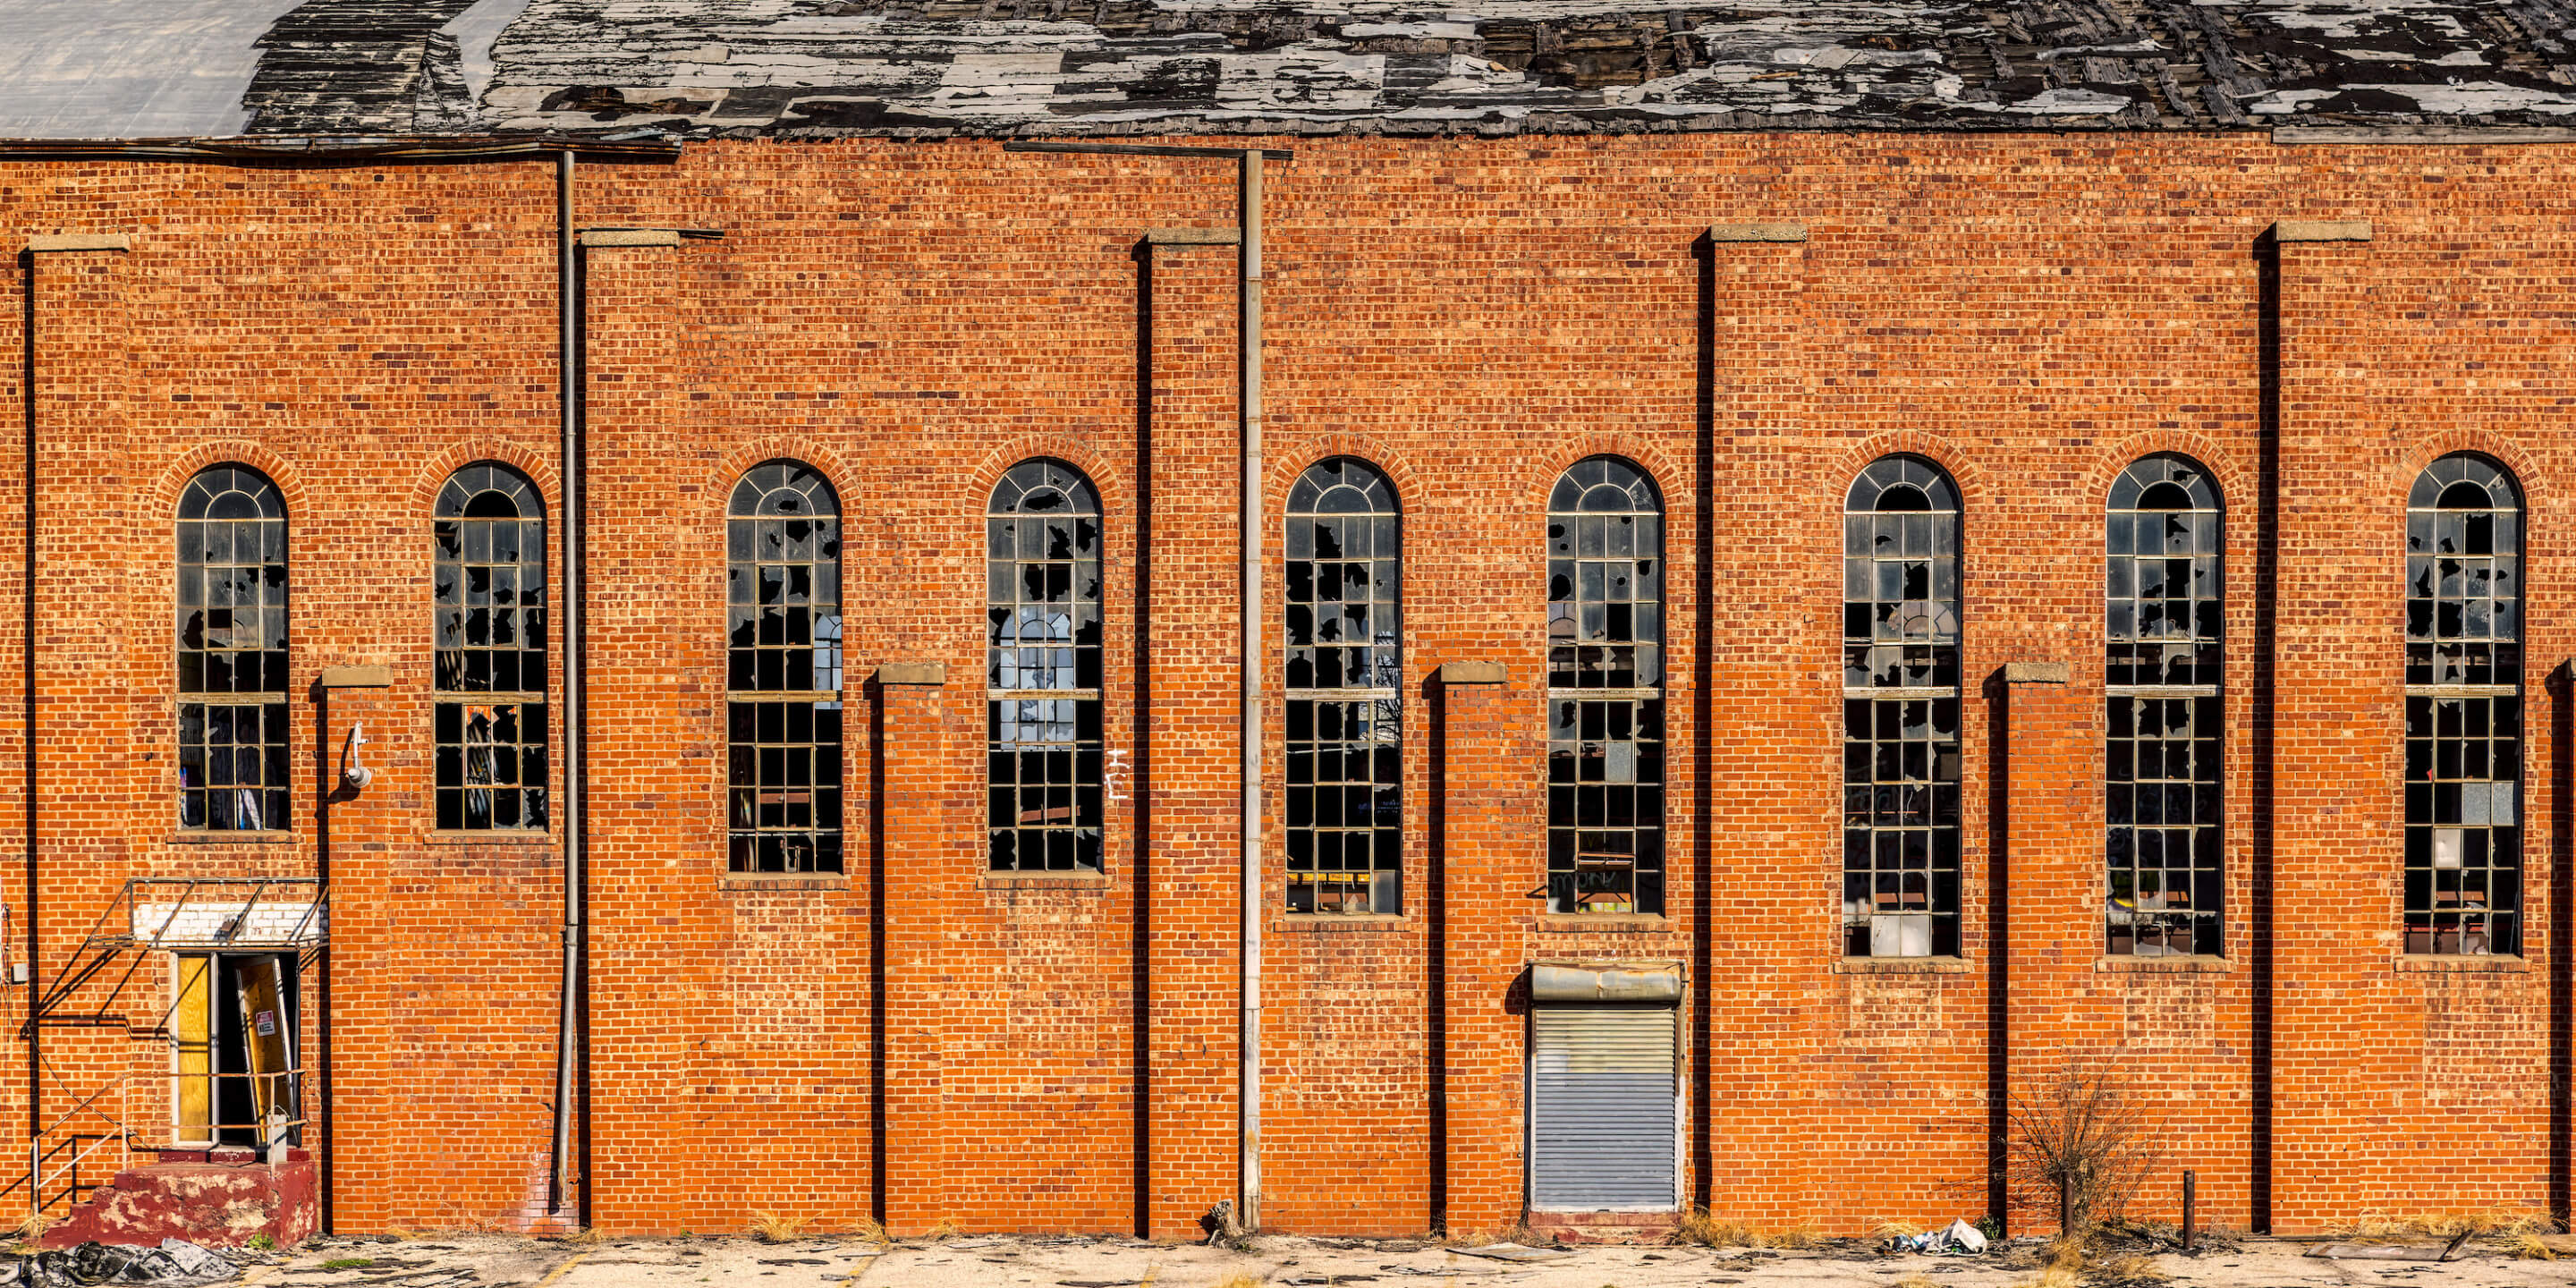 facade of a decaying brick building with broken arched windows